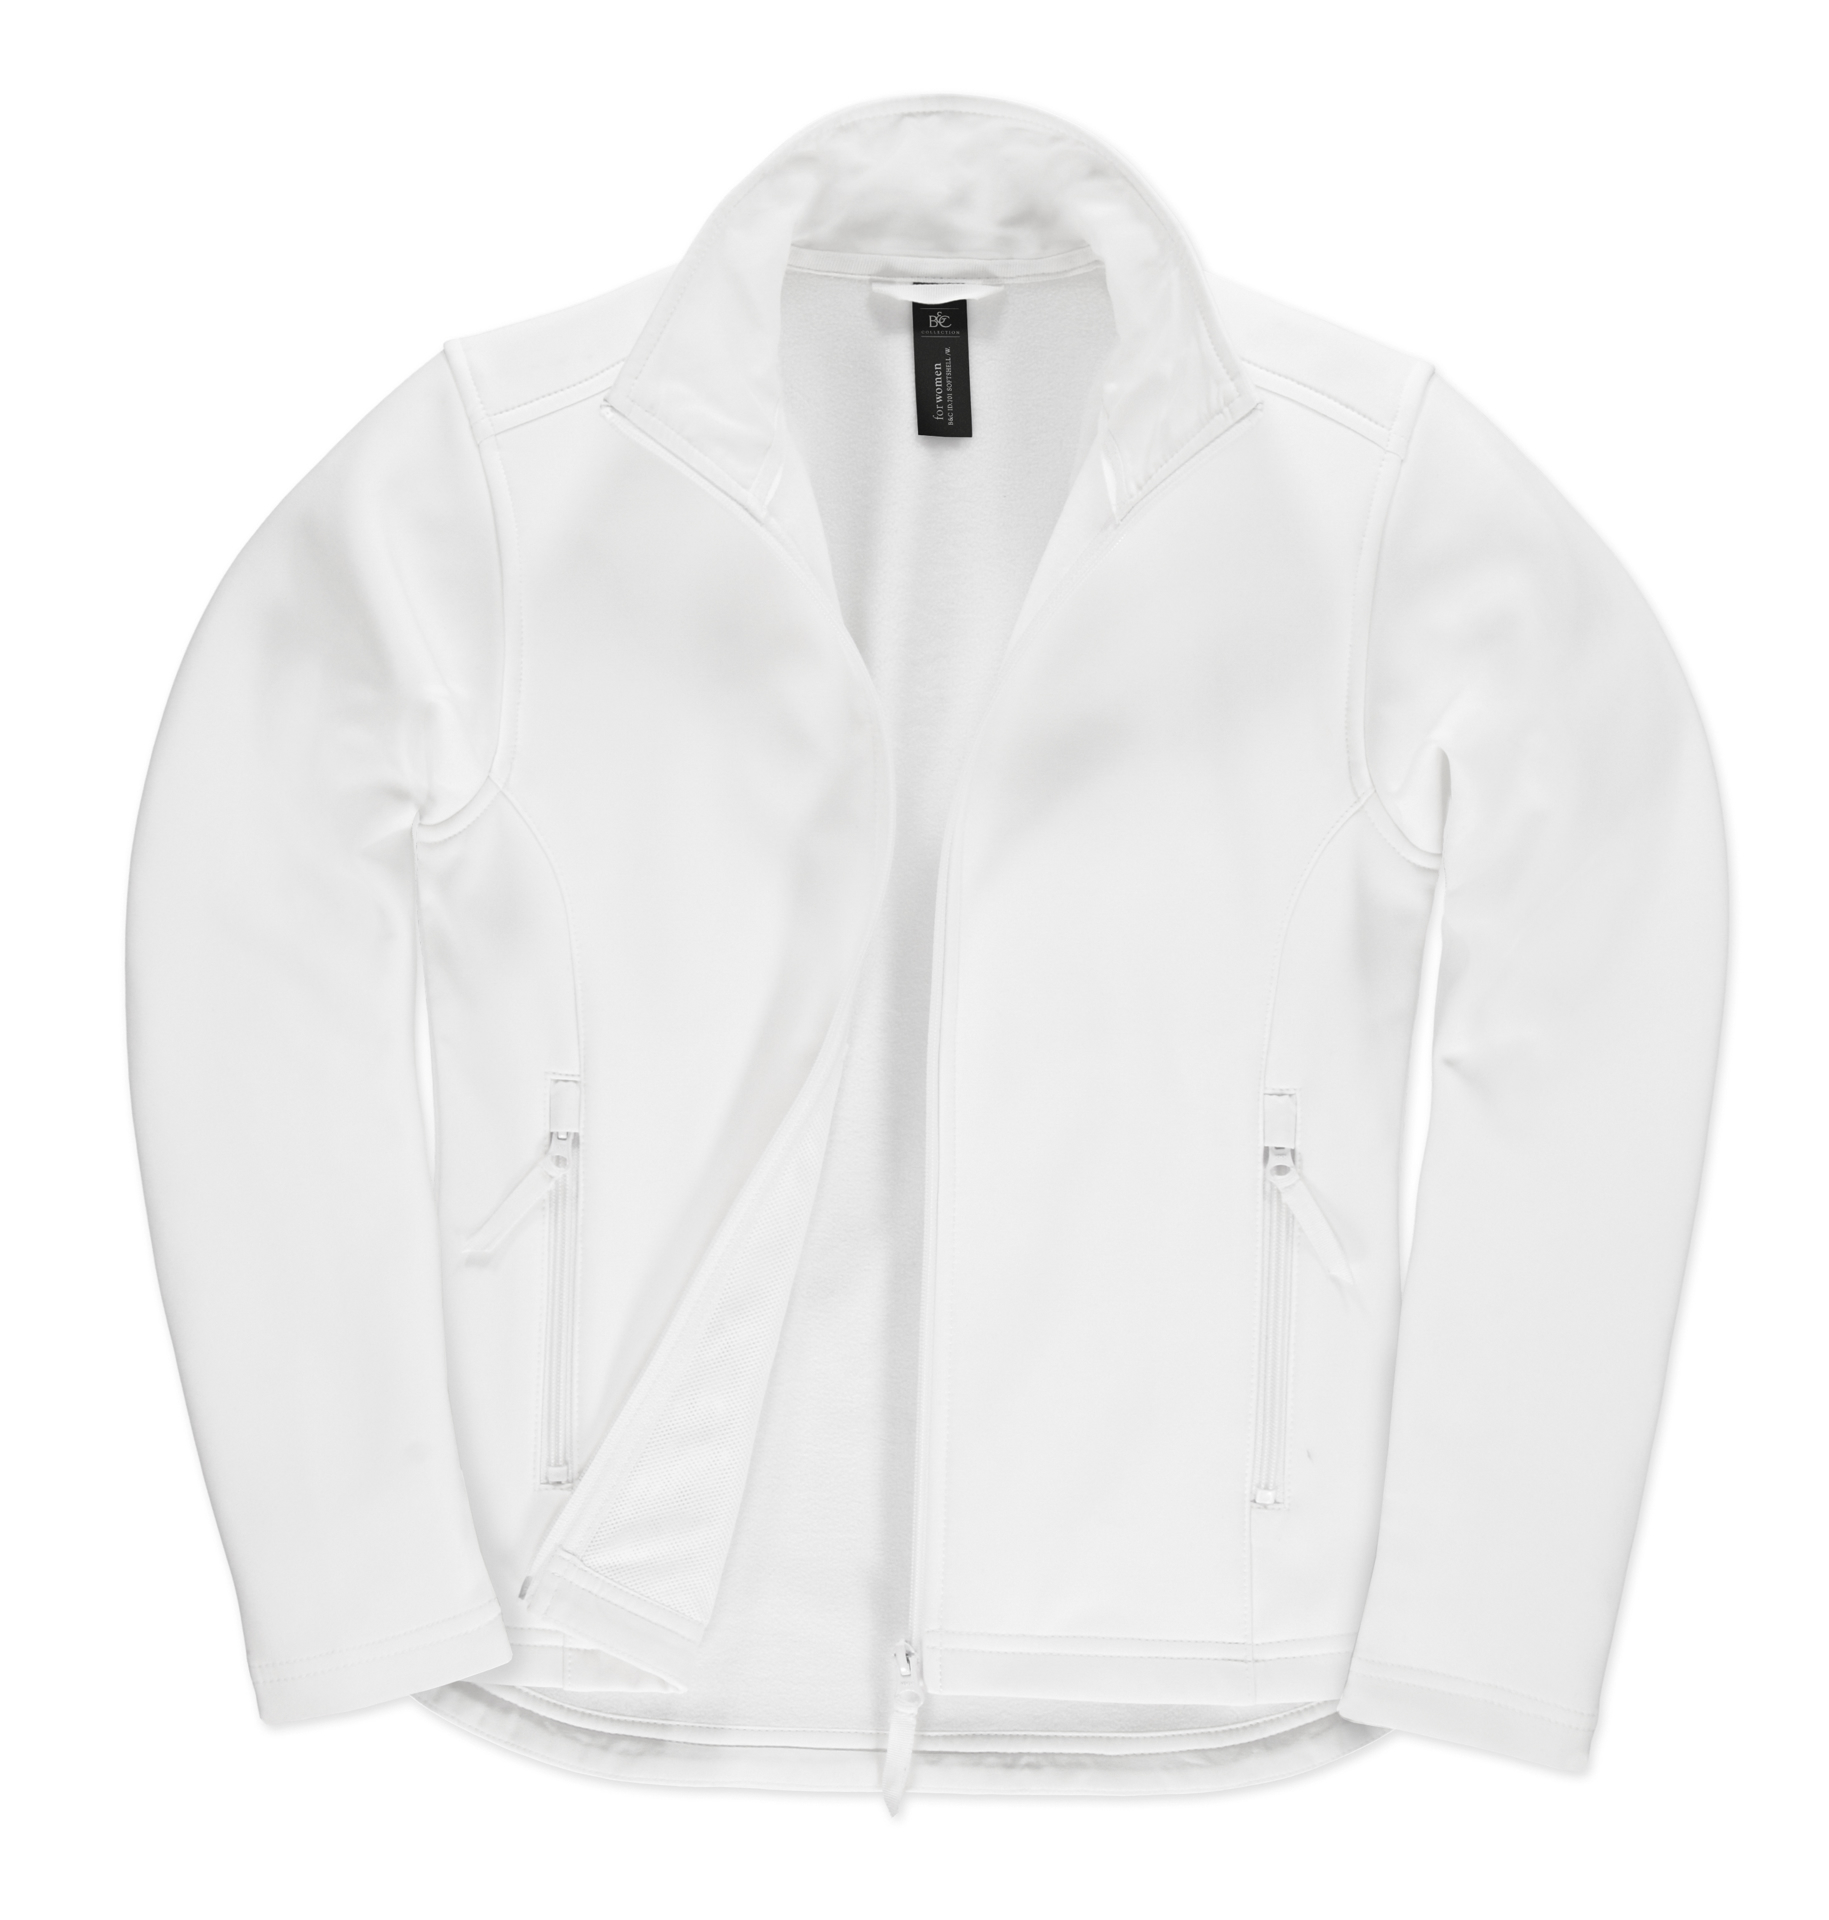 Womens ID 701 Softshell Jacket in white with full front zip and white inner fleece